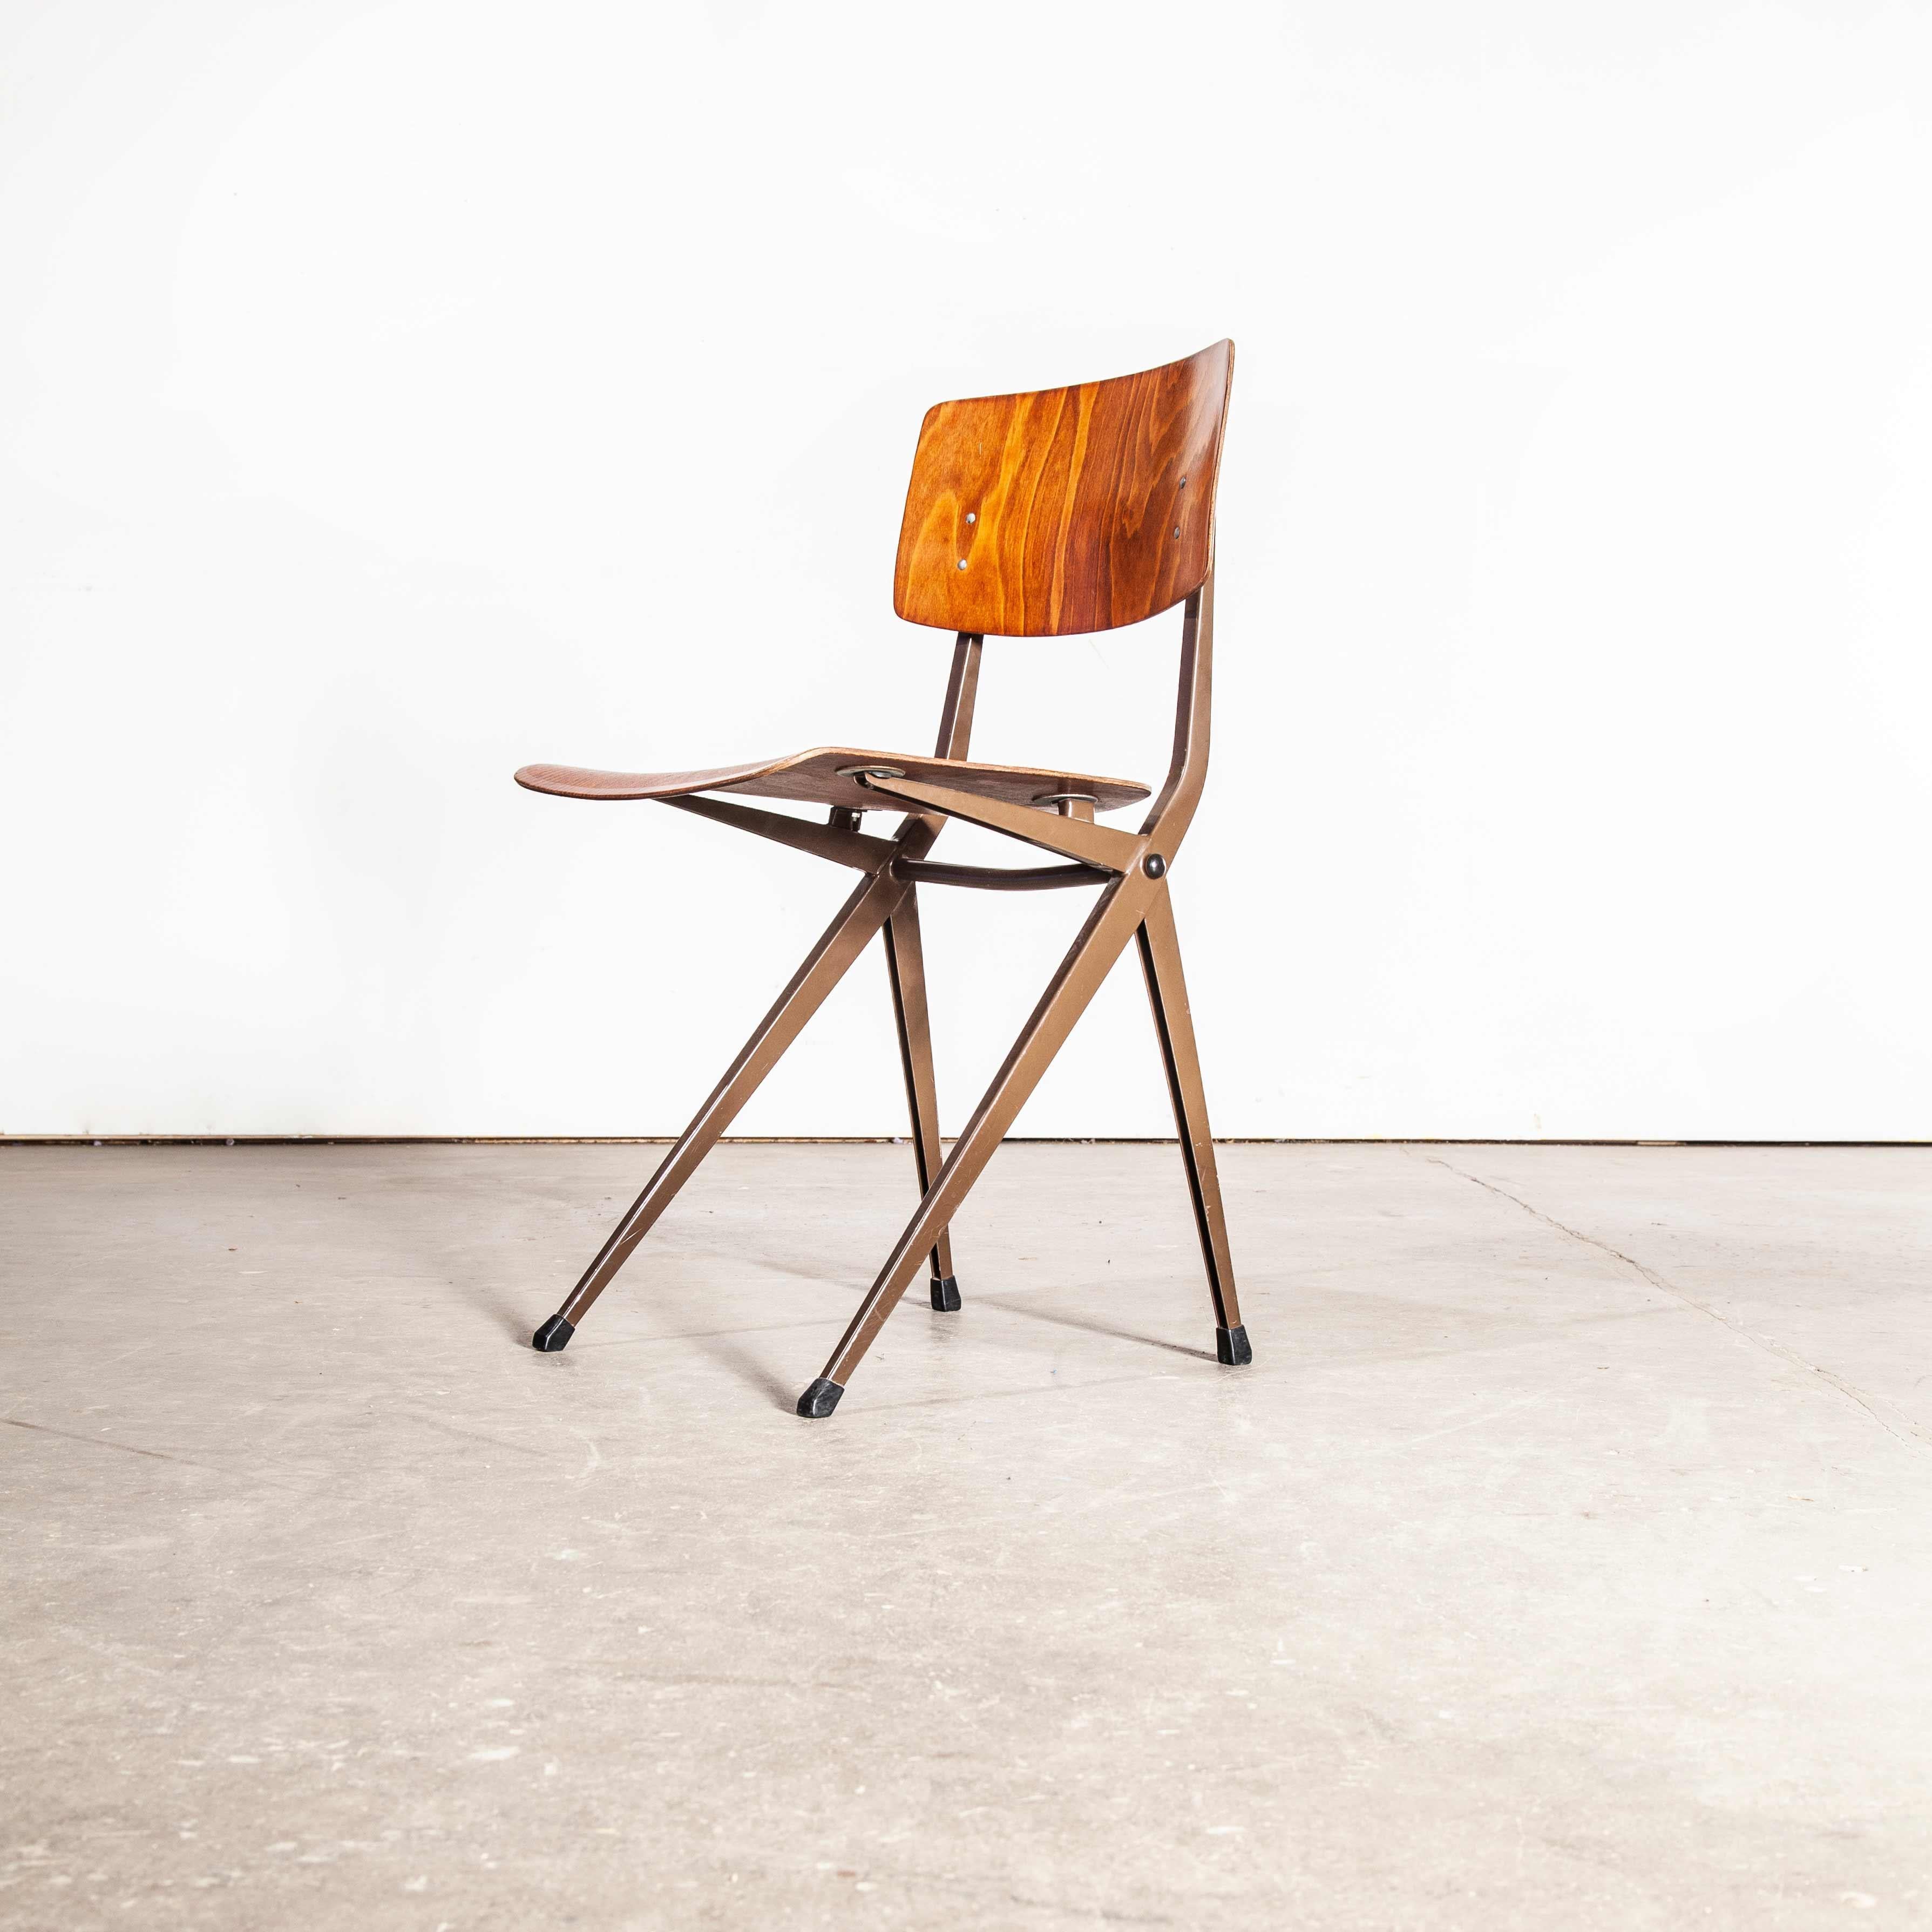 S201 dining chair by Ynske Kooistra for Marko – set of twenty four. The classic Dutch compass leg chair was perhaps originally created by Prouve who then inspired a number of beautiful chair designs in the late 1950’s. Friso Kramer and Wim Rietveld